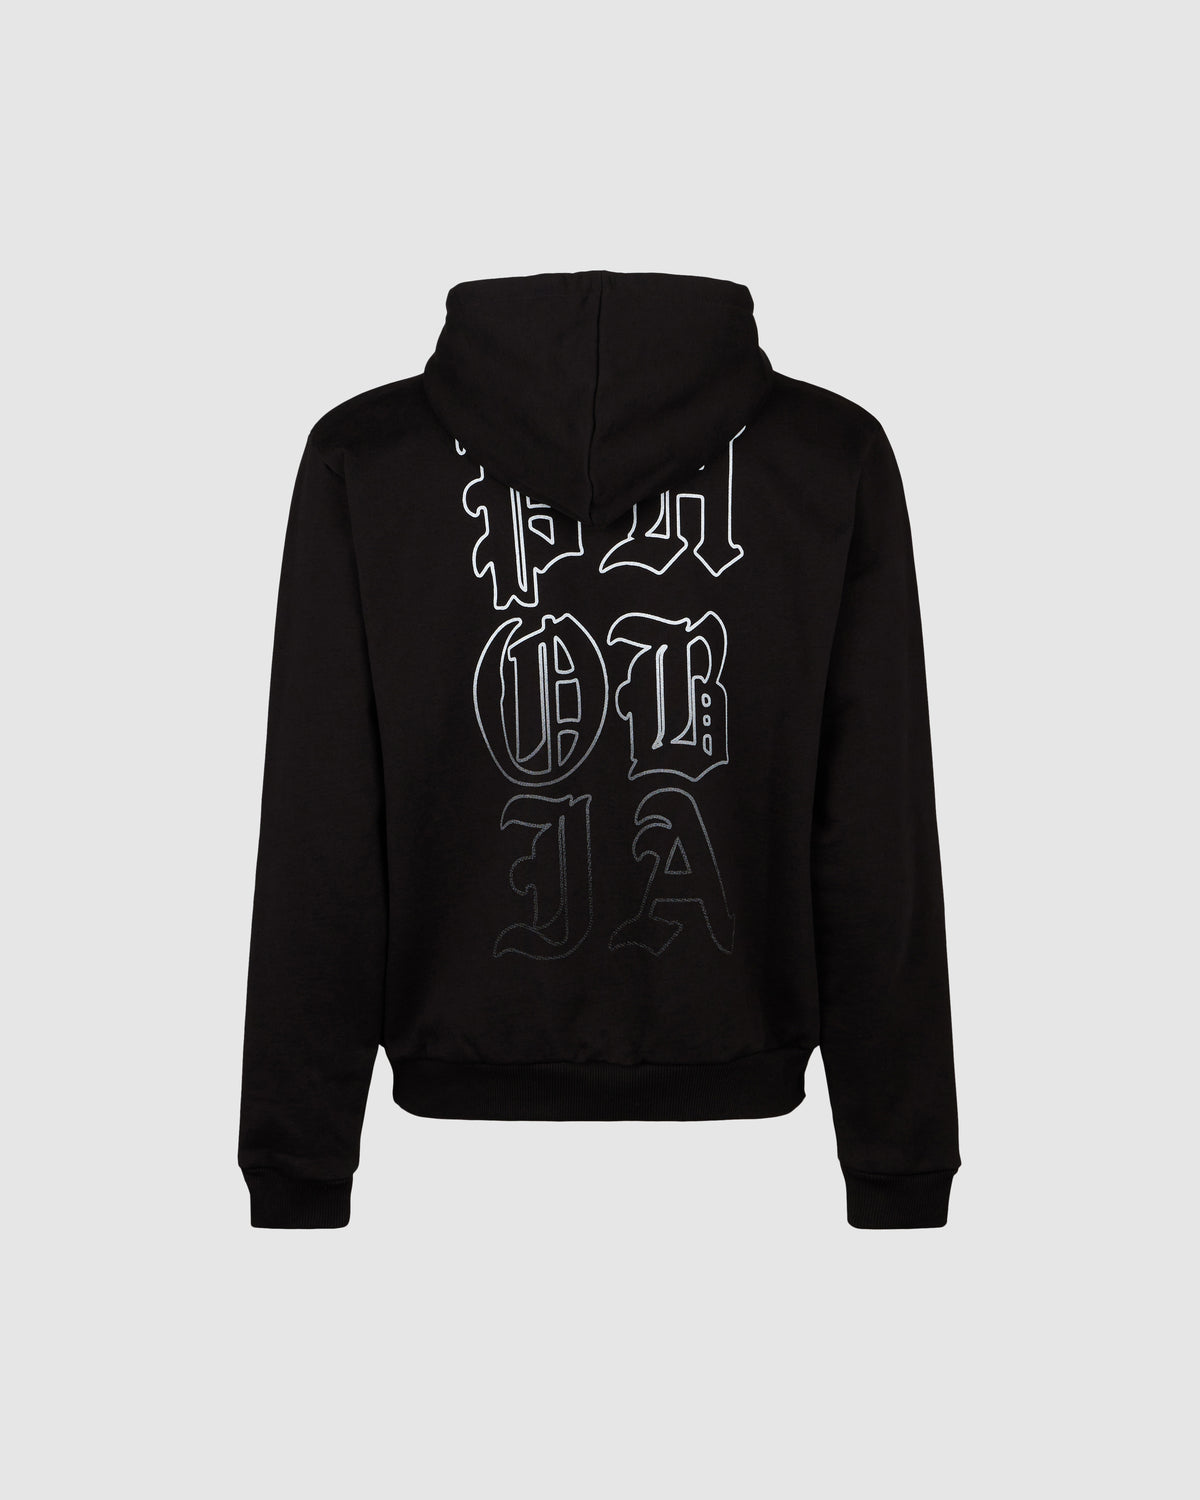 PHOBIA BLACK HOODIE WITH WHITE MOUTH PRINT